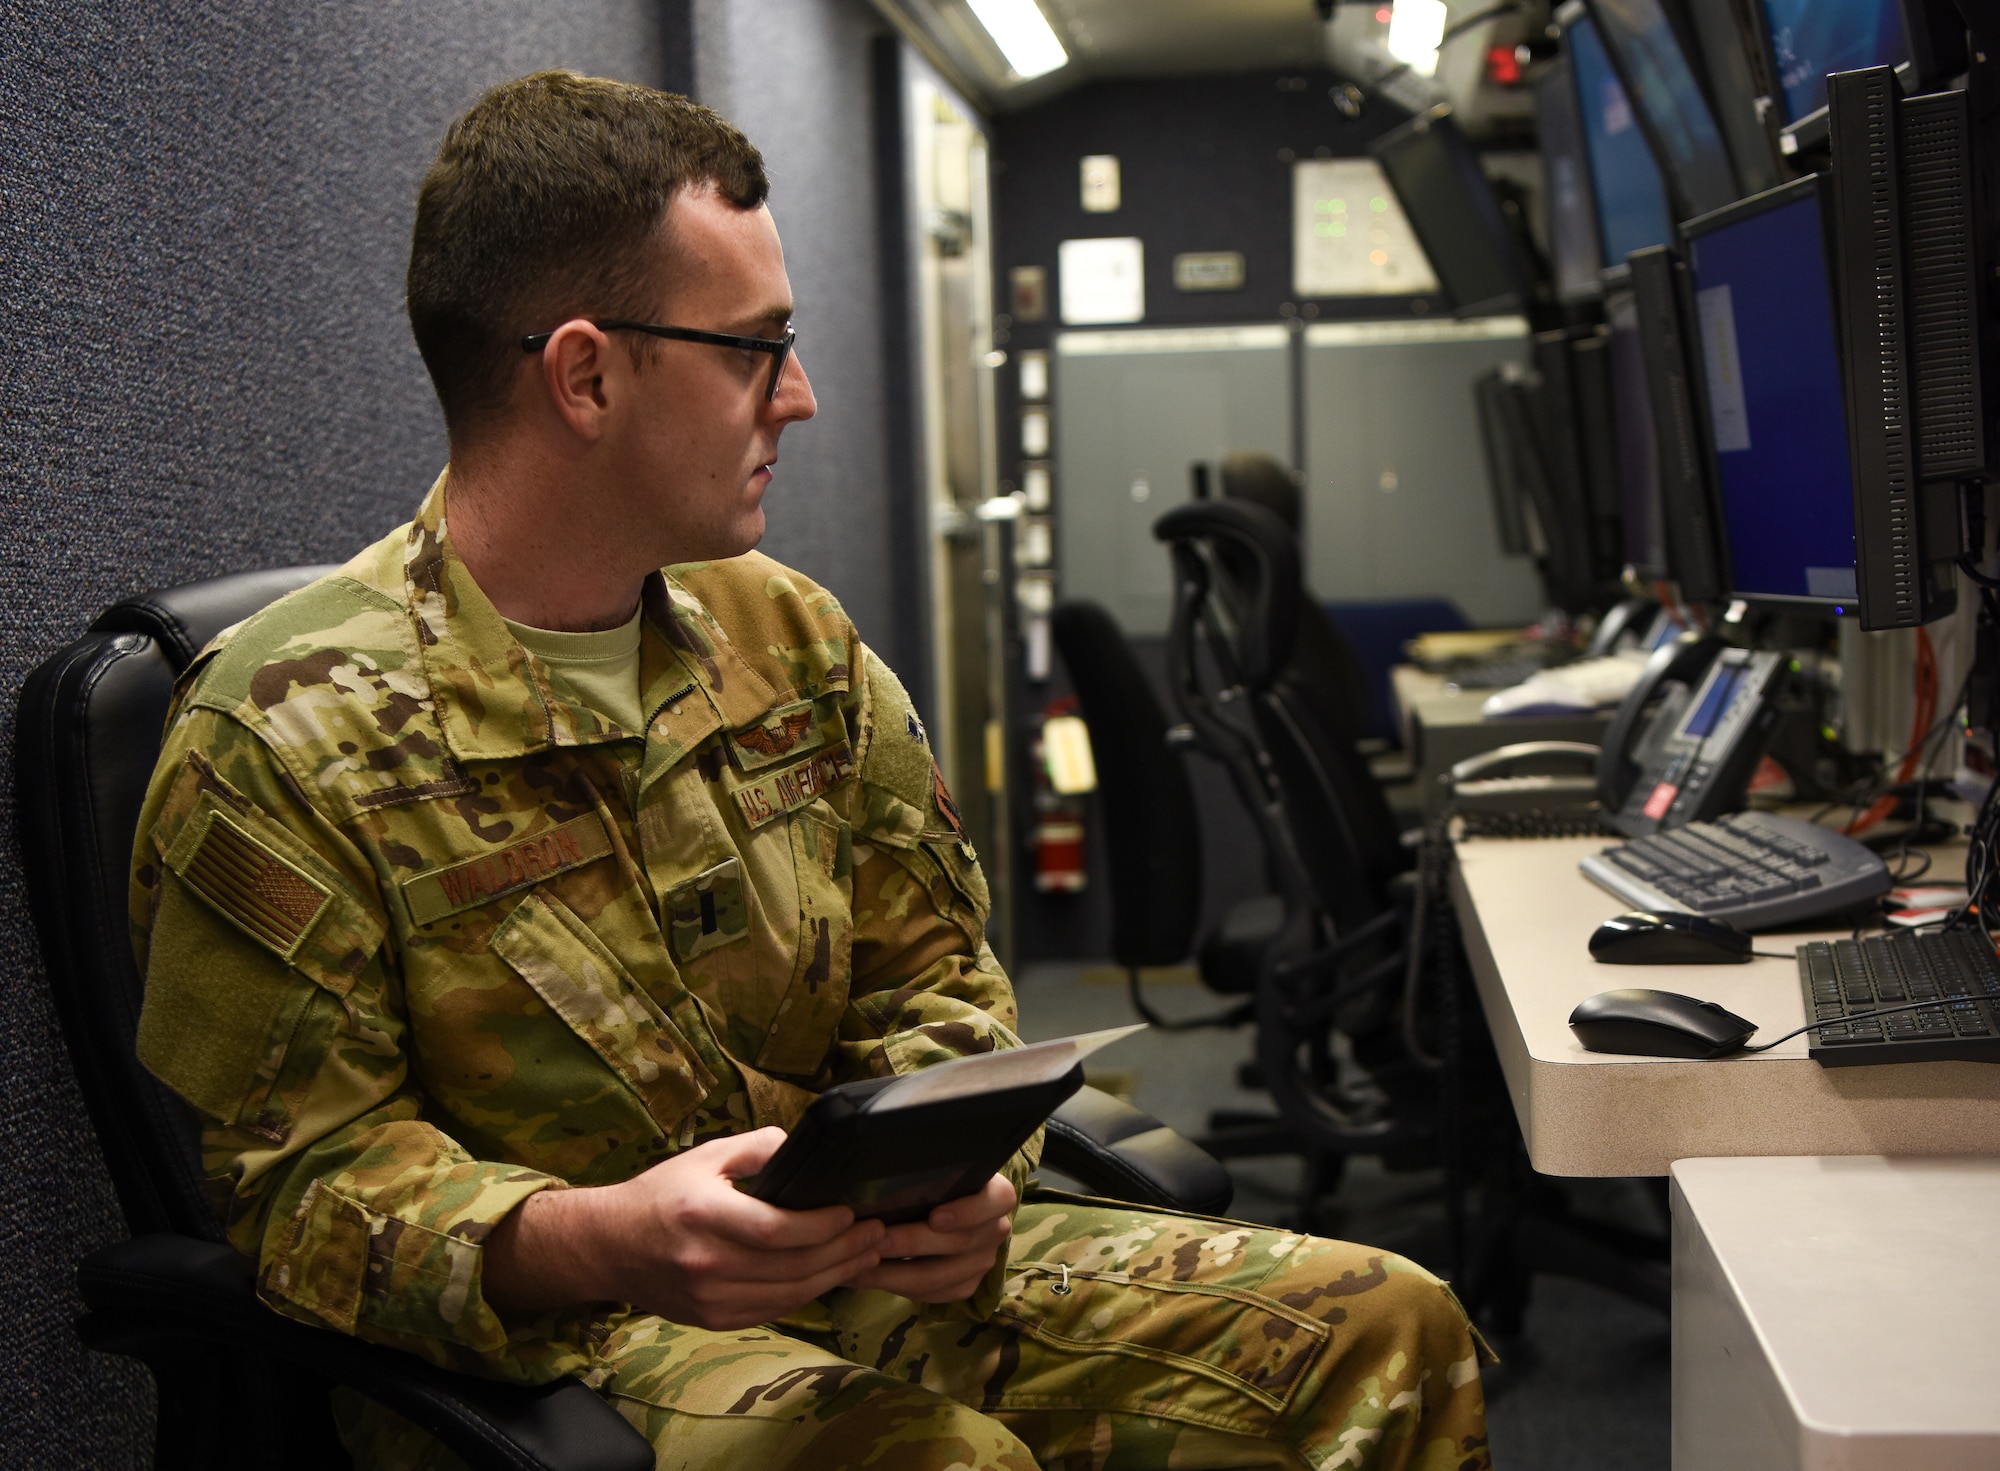 First Lt. Chirstopher Waldron, 348th Reconnaissance Squadron RQ-4 mission commander, examines the cabilities of an electronic flight book while inside an RQ-4 Global Hawk cockpit May 13, 2019 at Grand Forks Air Force Base, North Dakota. The classification procedures for Grand Forks AFB’s EFB program allow pilots to access their EFB’s in secure areas to aid in mission completion.  (U.S. Air Force photo by Senior Airman Elijaih Tiggs)